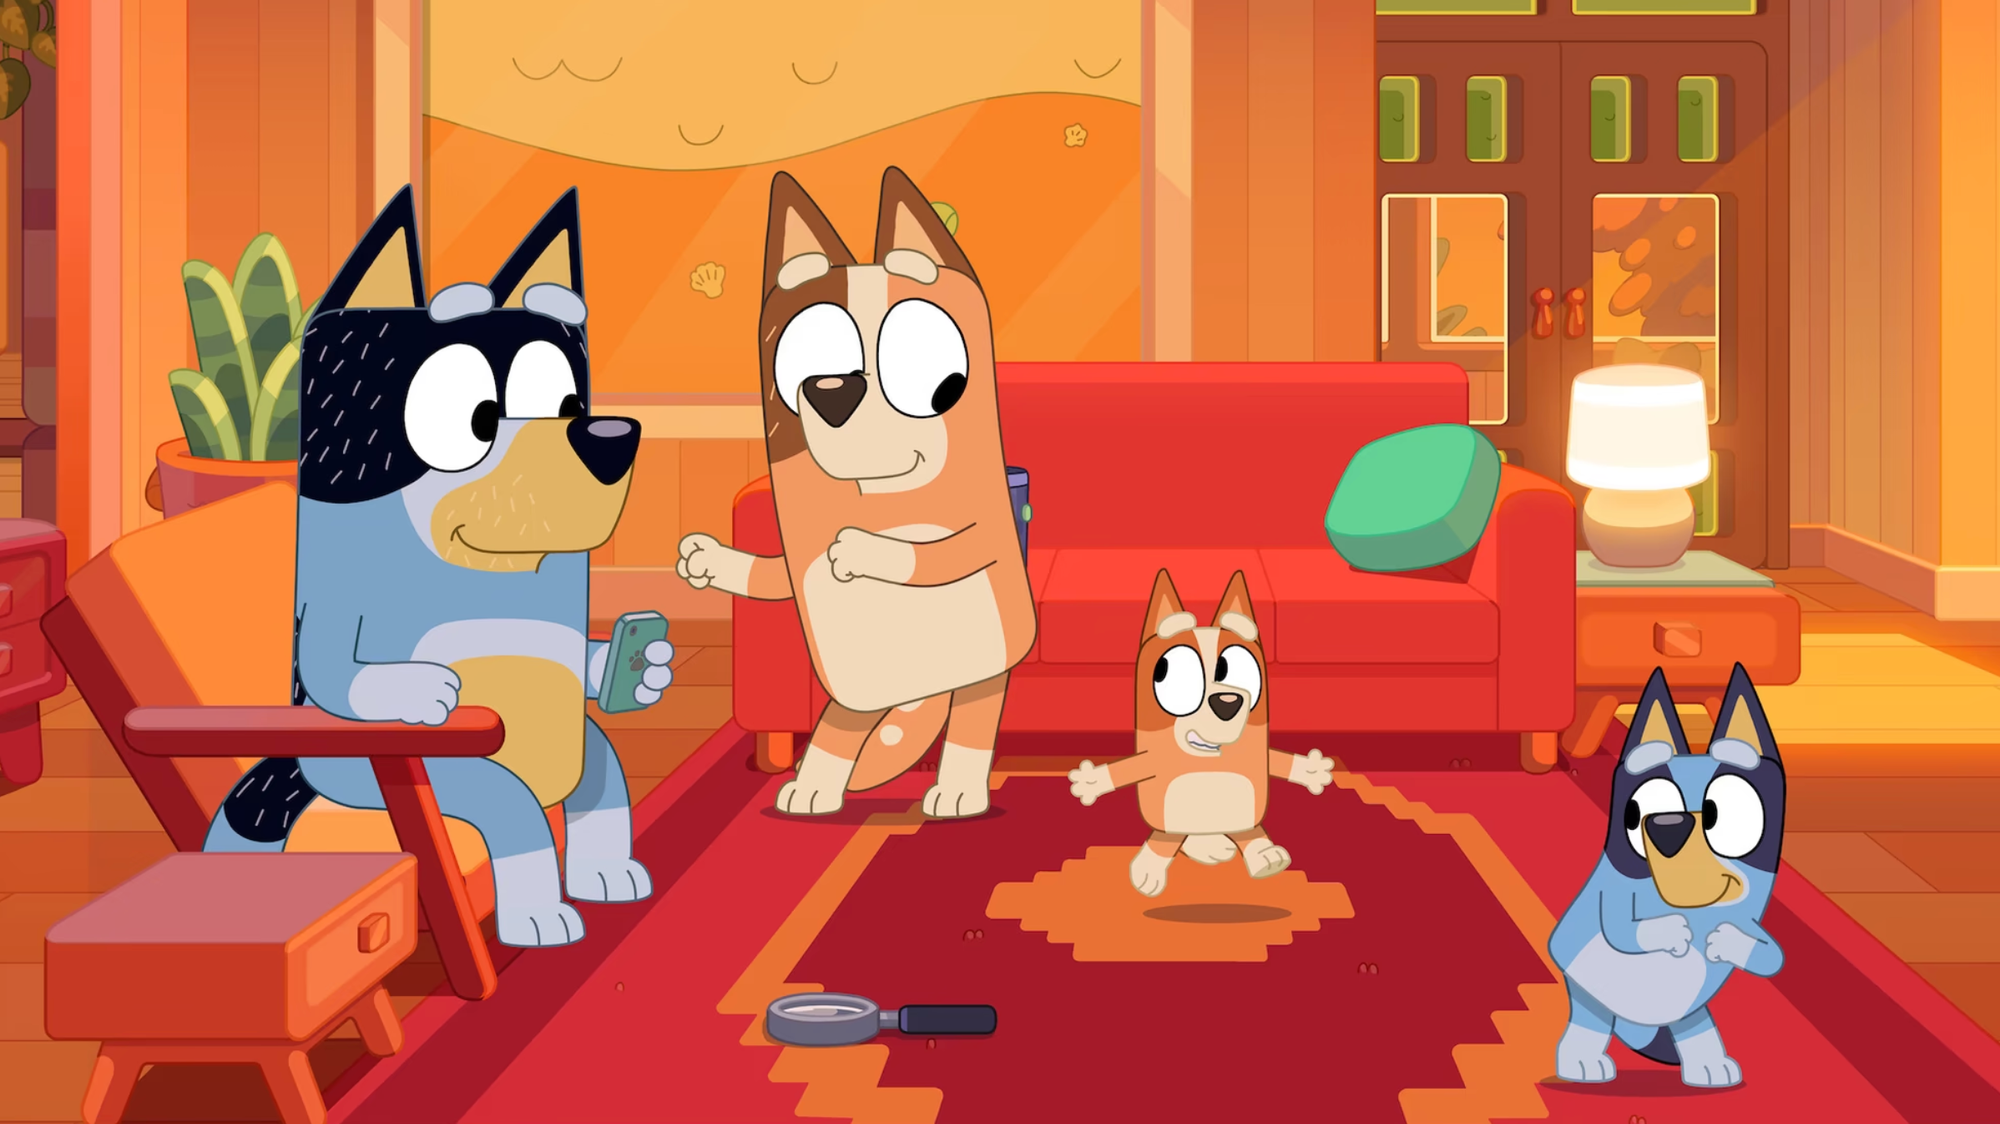 The Heeler family, four anthropomorphic, animated dogs, boogie down in a room dominated by red colors.